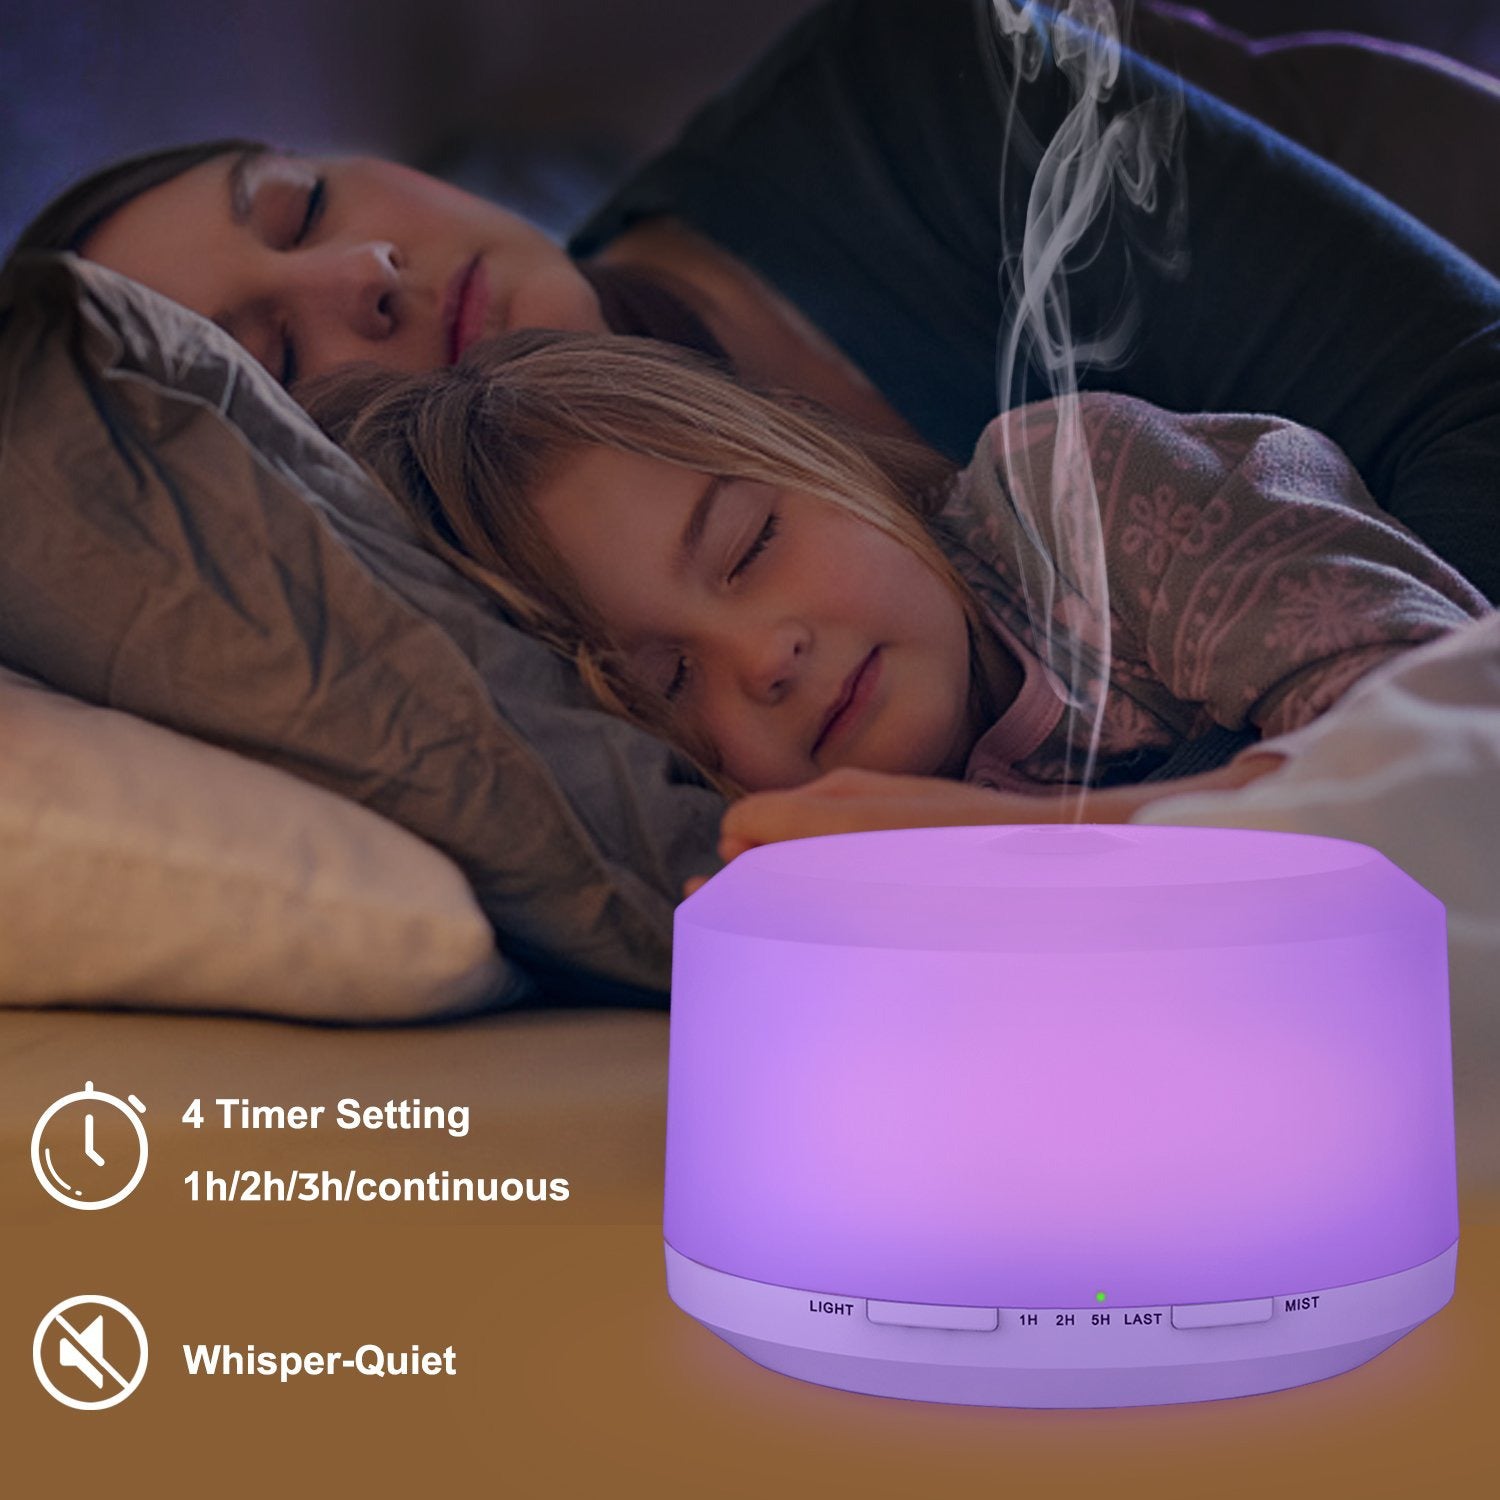 500ml Aromatherapy Diffuser Humidifier with LED Lamp and Timer